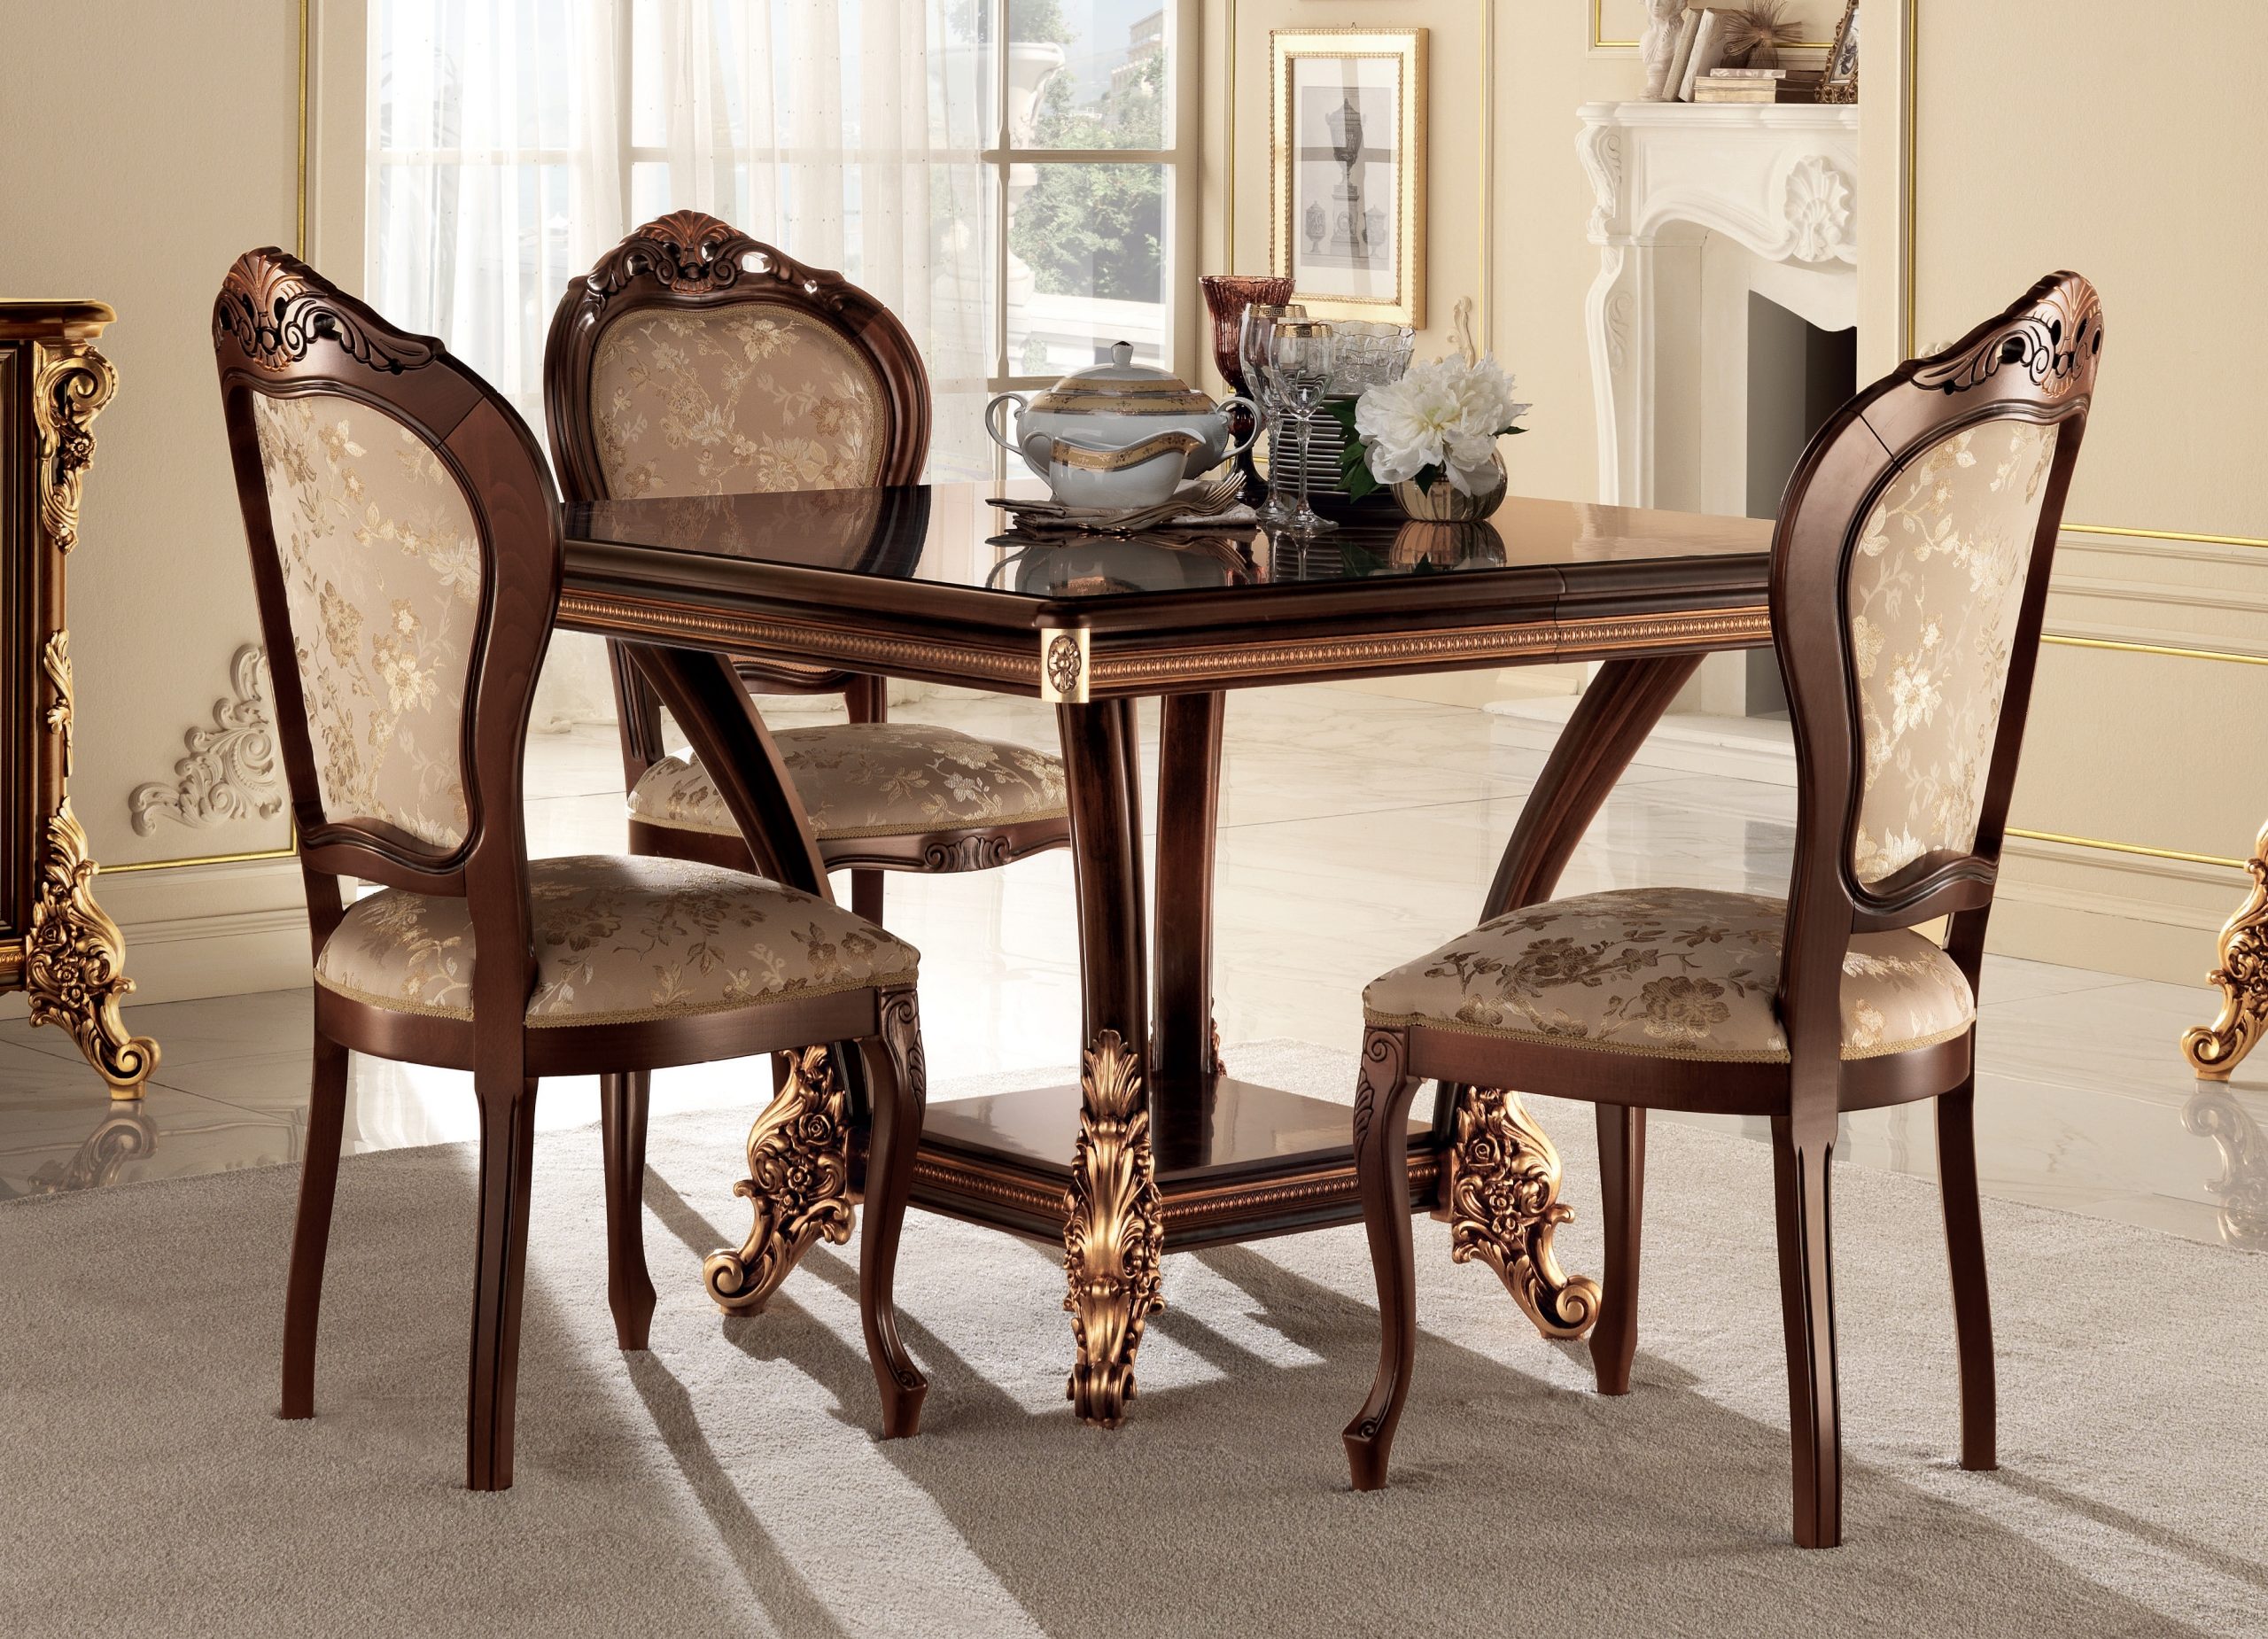 Italian Dining Table Sets Uk • Faucet Ideas Site